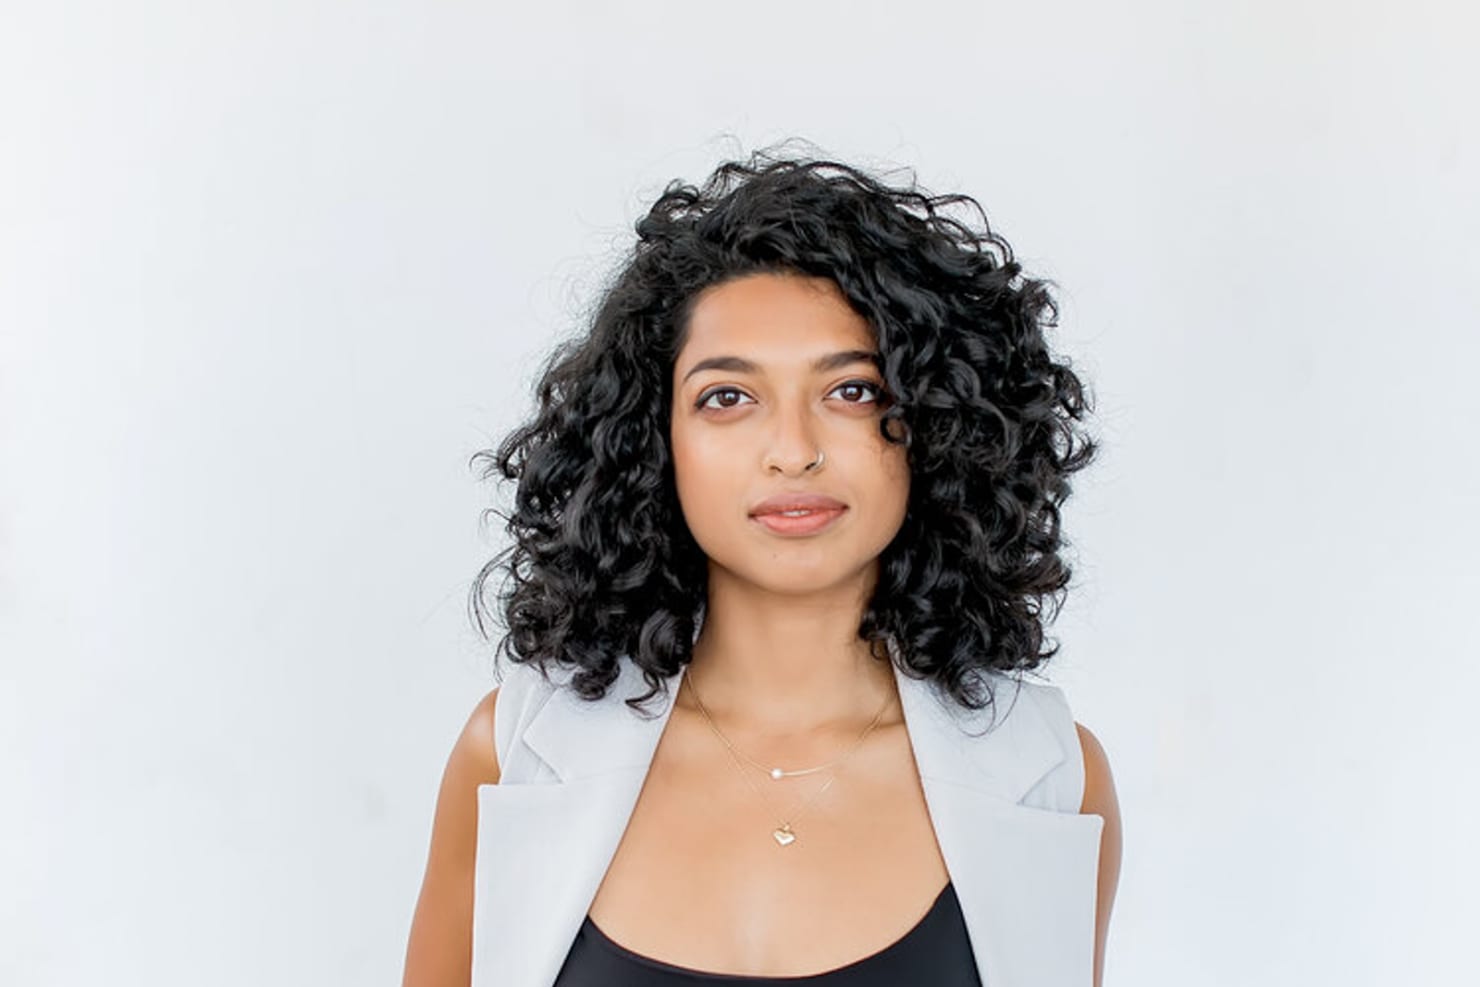 An image of a woman, Chelsea de Souza, standing before a white background and looking directly at the camera, hands in her pockets.